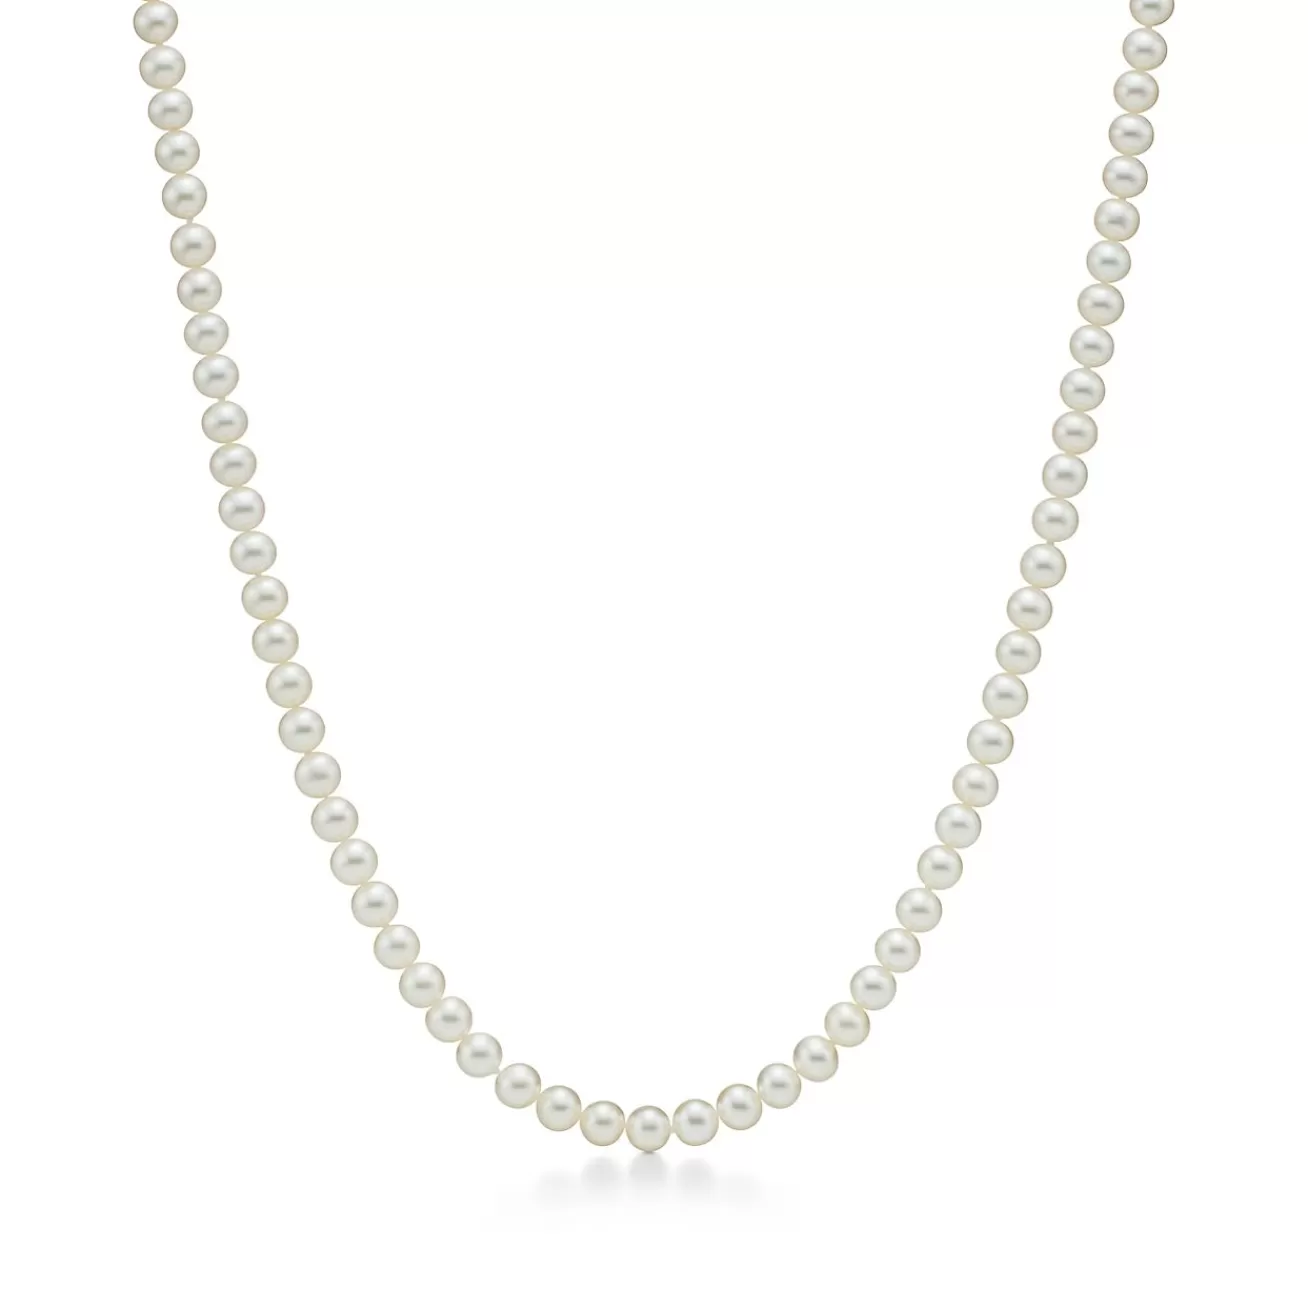 Tiffany & Co. Ziegfeld Collection Pearl Necklace with a Silver Clasp, 6-7 mm | ^ Necklaces & Pendants | Sterling Silver Jewelry